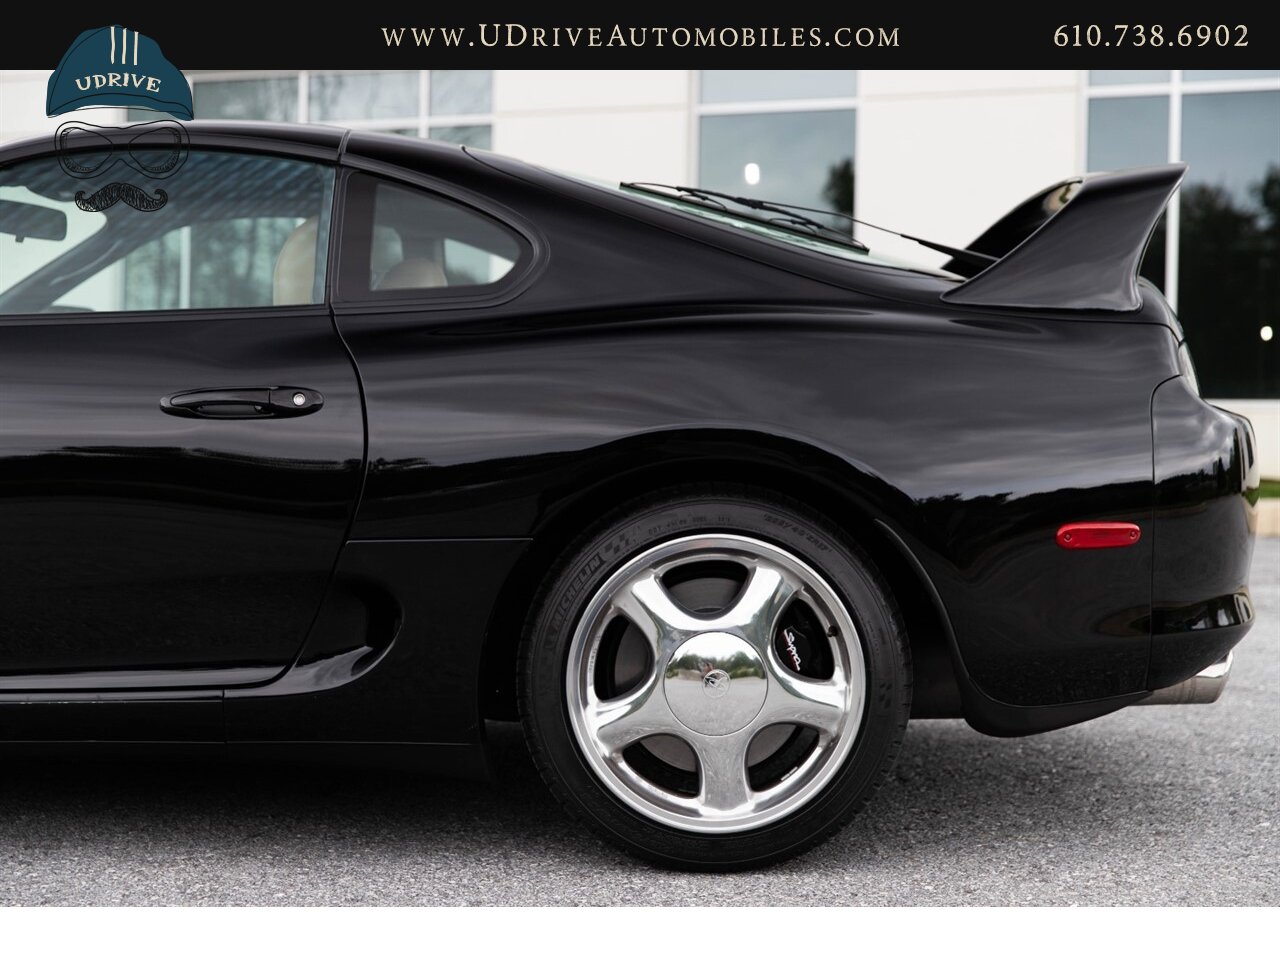 1997 Toyota Supra Turbo 6 Speed Manual 15th Anniversary Edition   - Photo 25 - West Chester, PA 19382